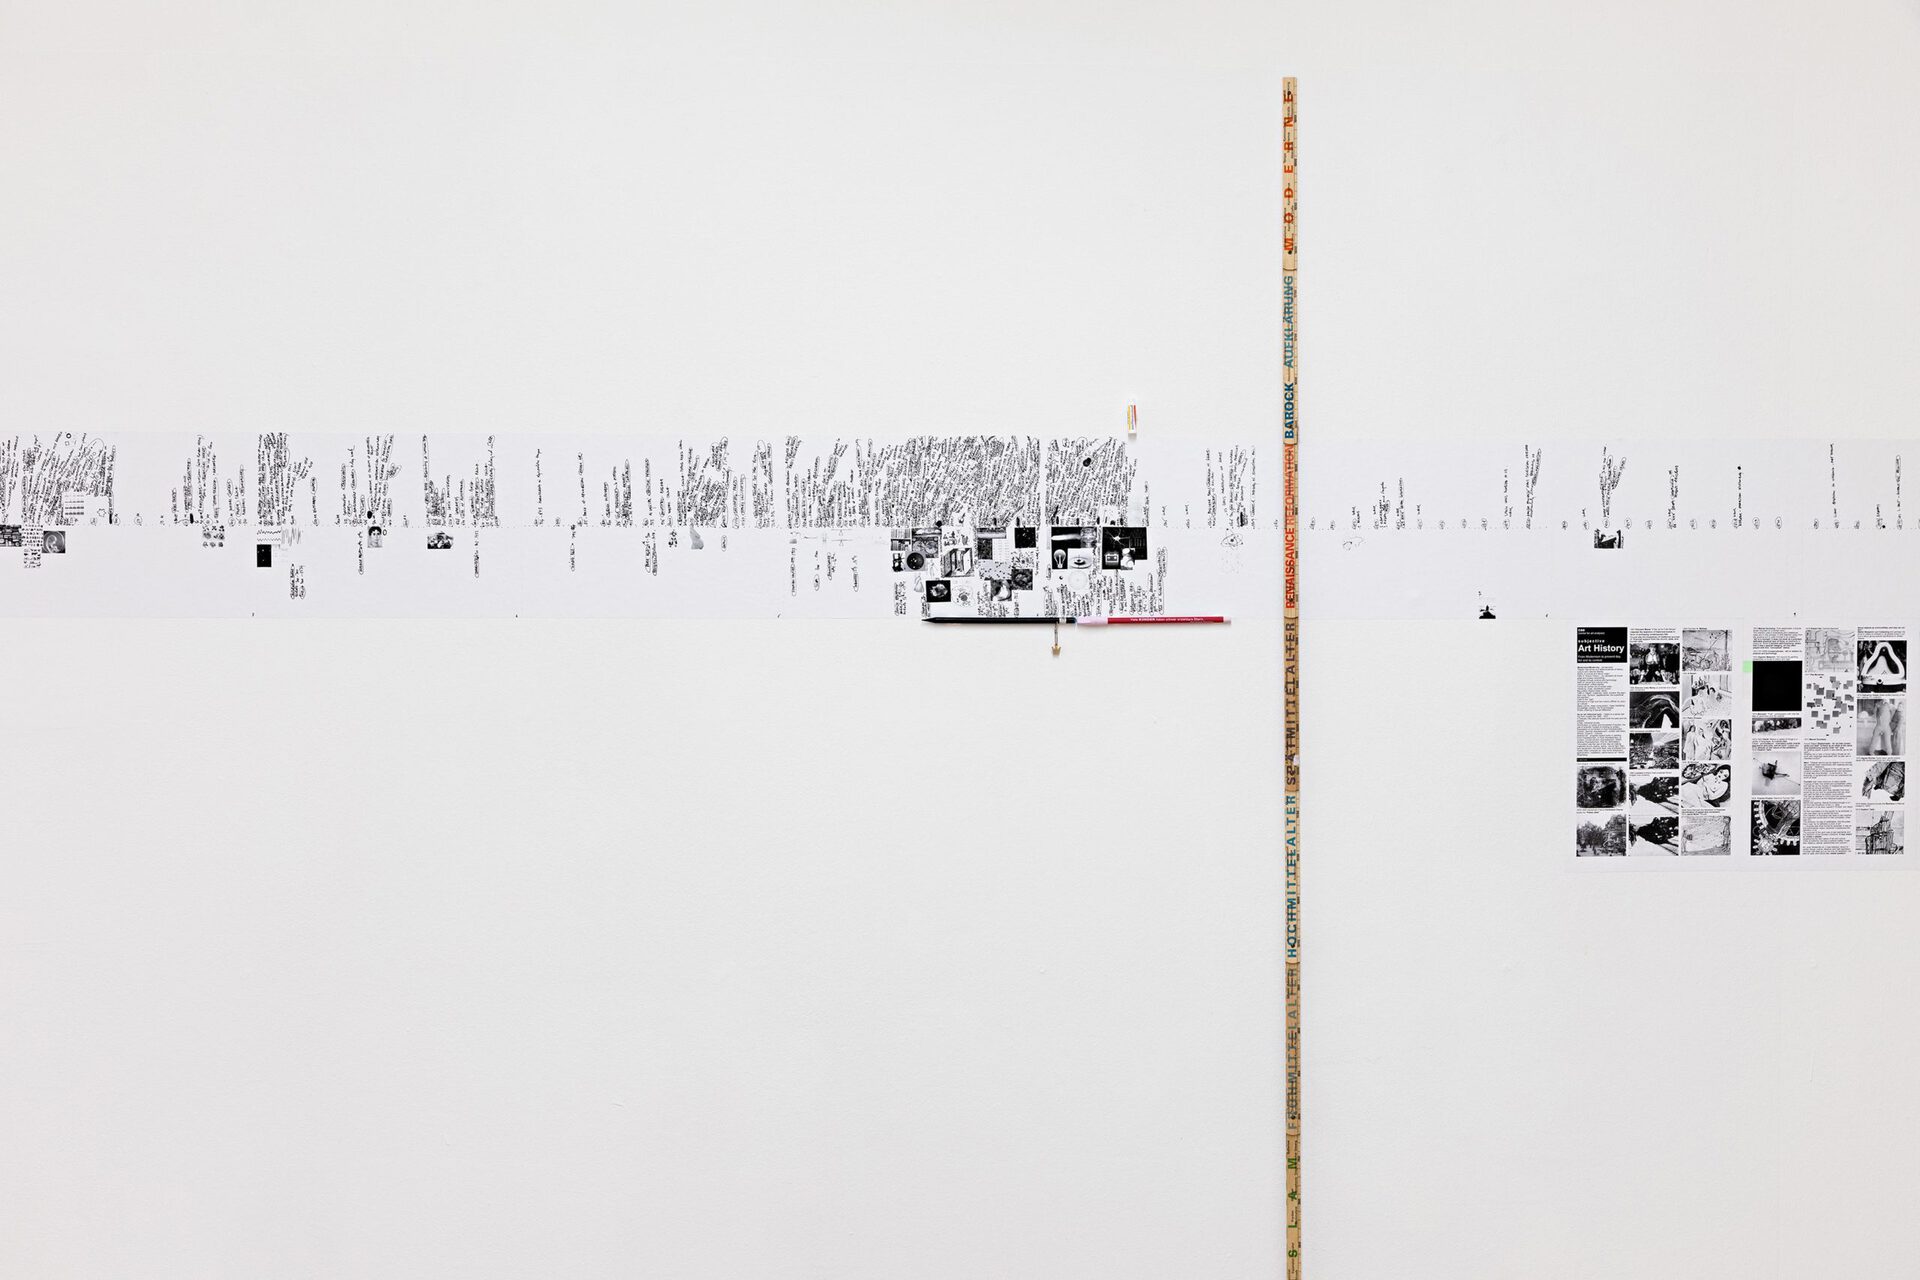 Lia Perjovschi, general culture timeline (from the fire discovery until today), 1997 – ongoing; subjective art history (from modernism until today), 1990 – 2004, 2004 – today; details, 2021; exhibition view THE EQUALITY OF POSSIBILITY, Kunstverein Bielefeld, 2021. Photo: Fred Dott